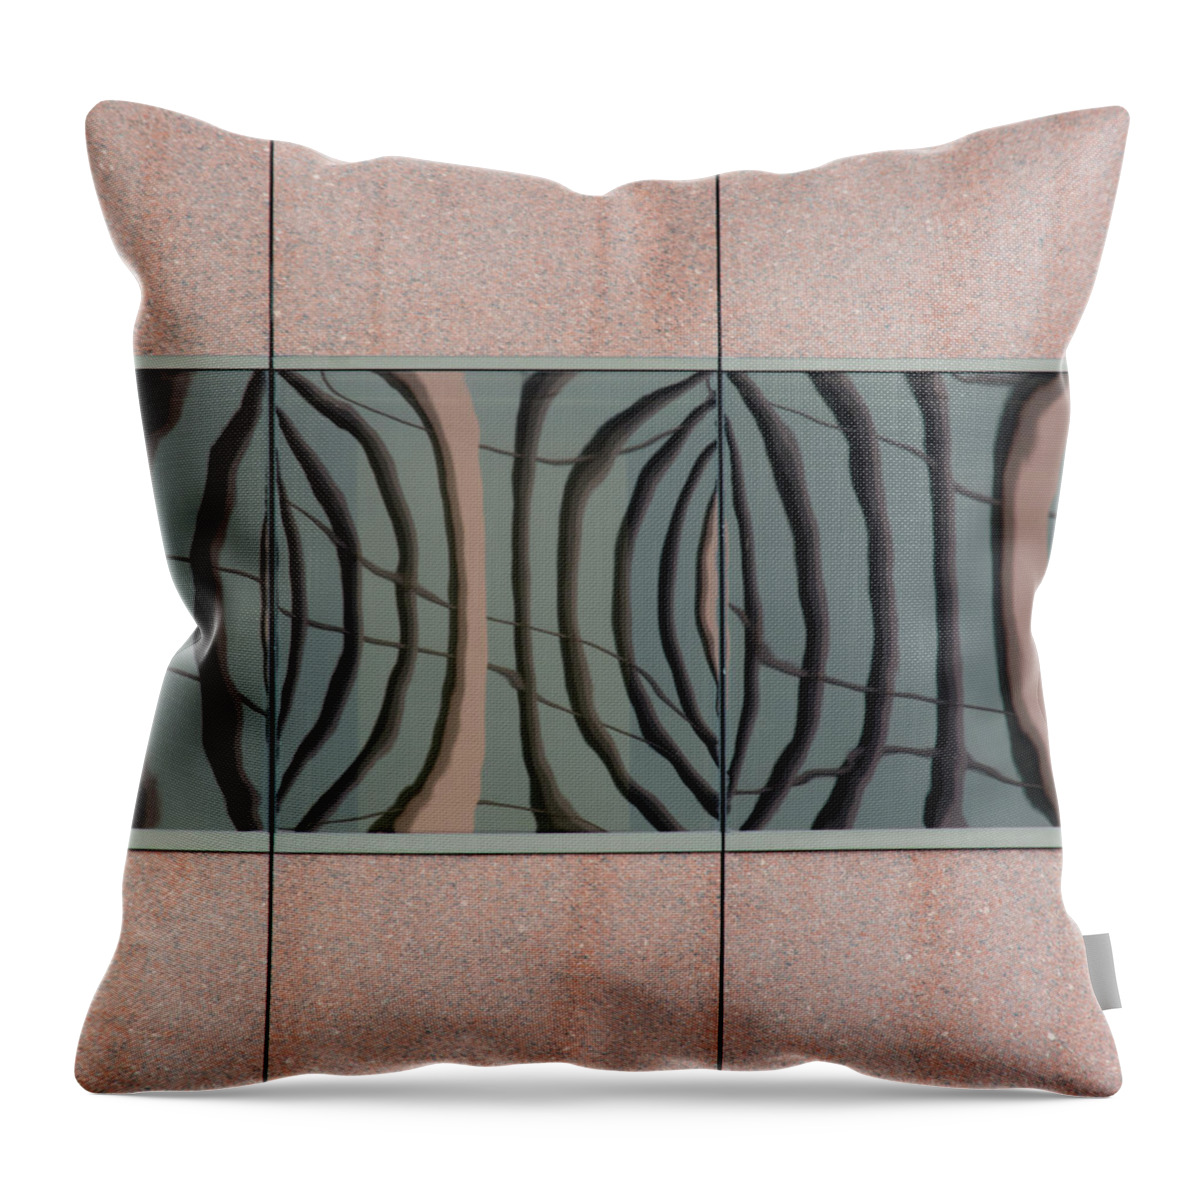 Urban Throw Pillow featuring the photograph Square - Abstritecture 35 by Stuart Allen